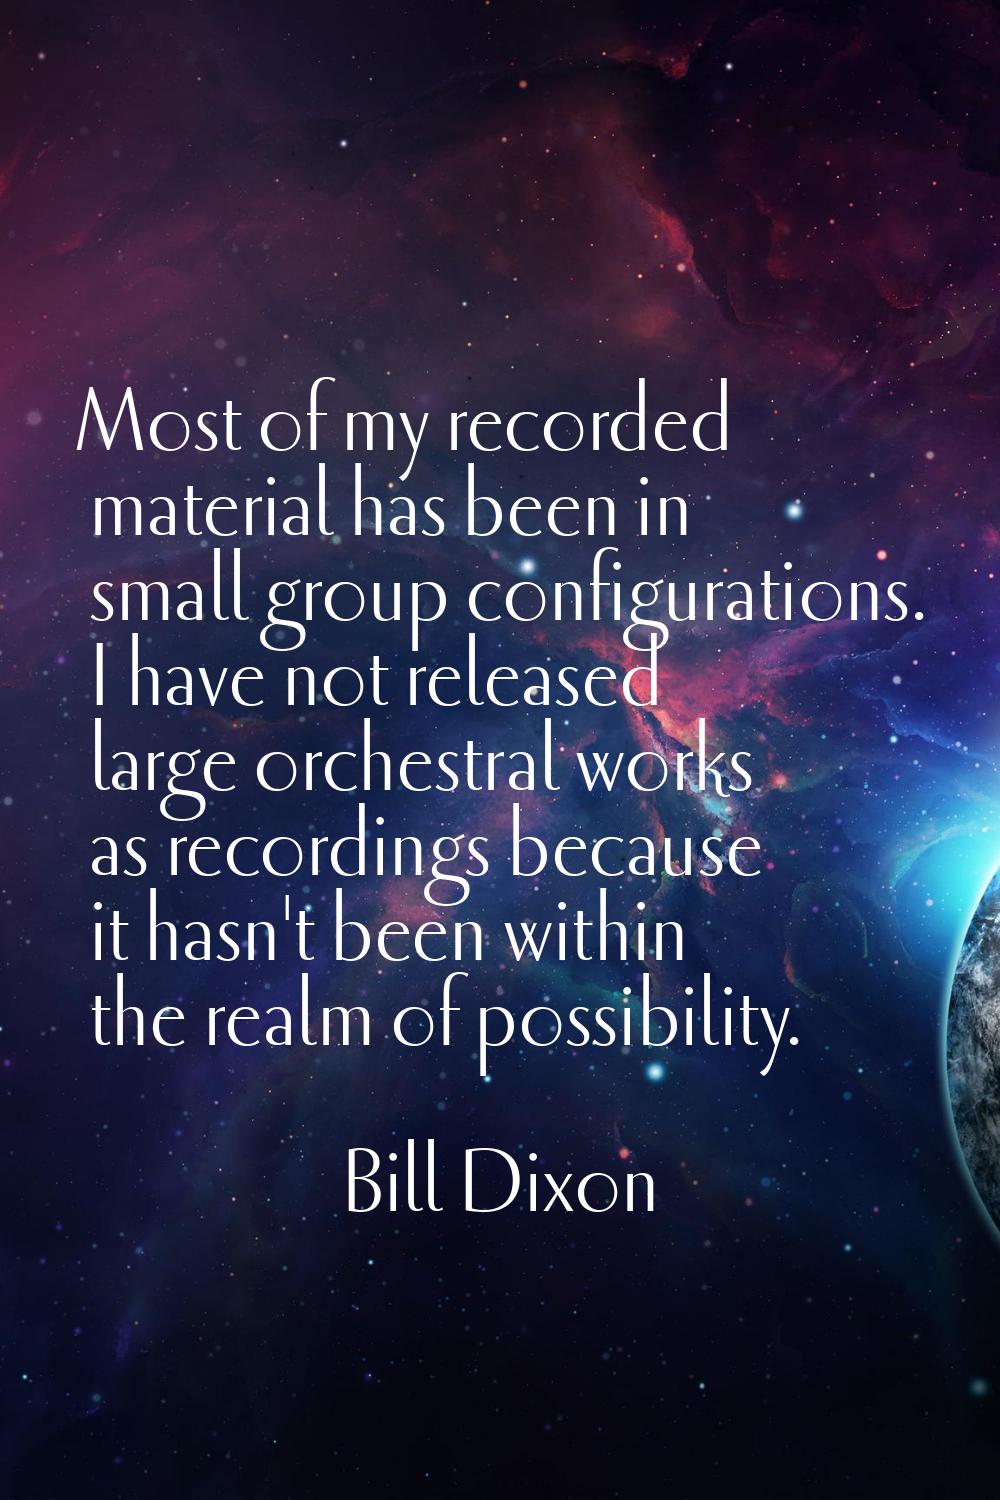 Most of my recorded material has been in small group configurations. I have not released large orch